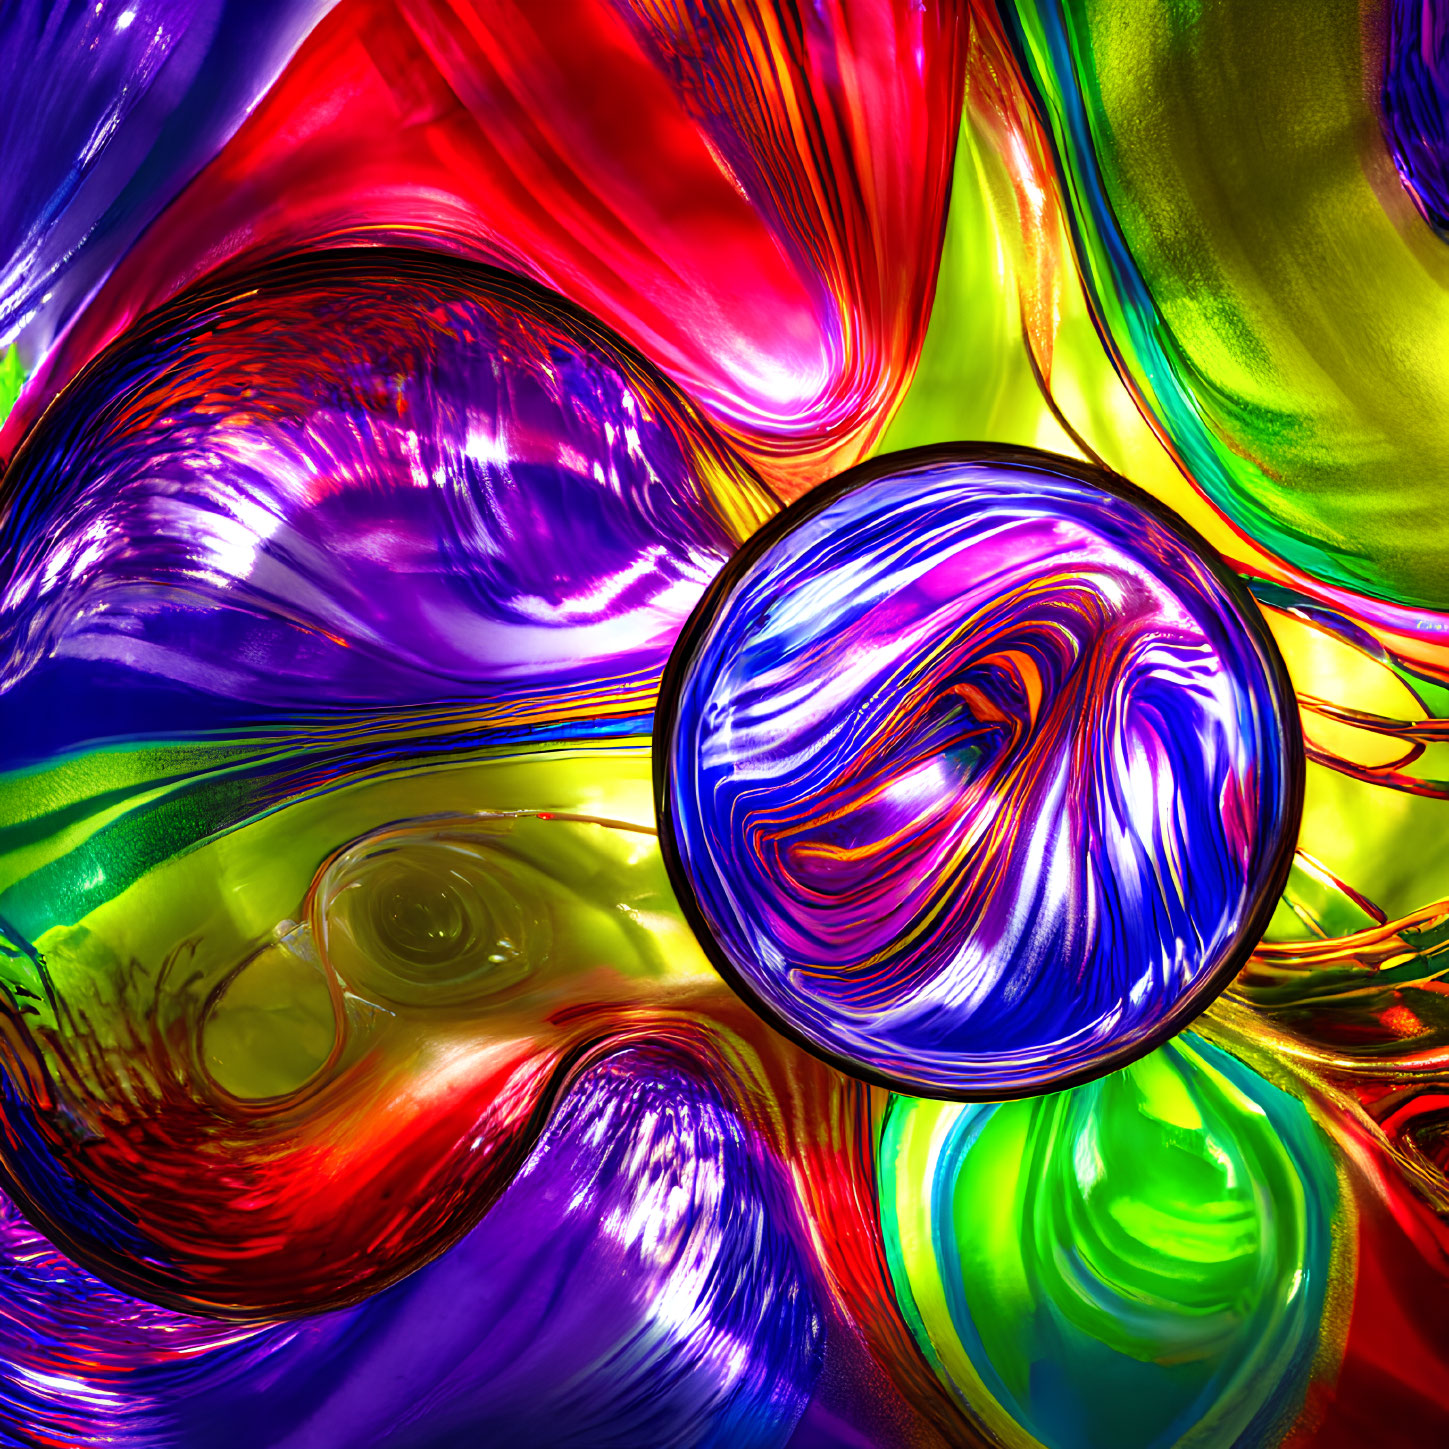 Colorful Abstract Art with Swirling Patterns in Glossy Texture